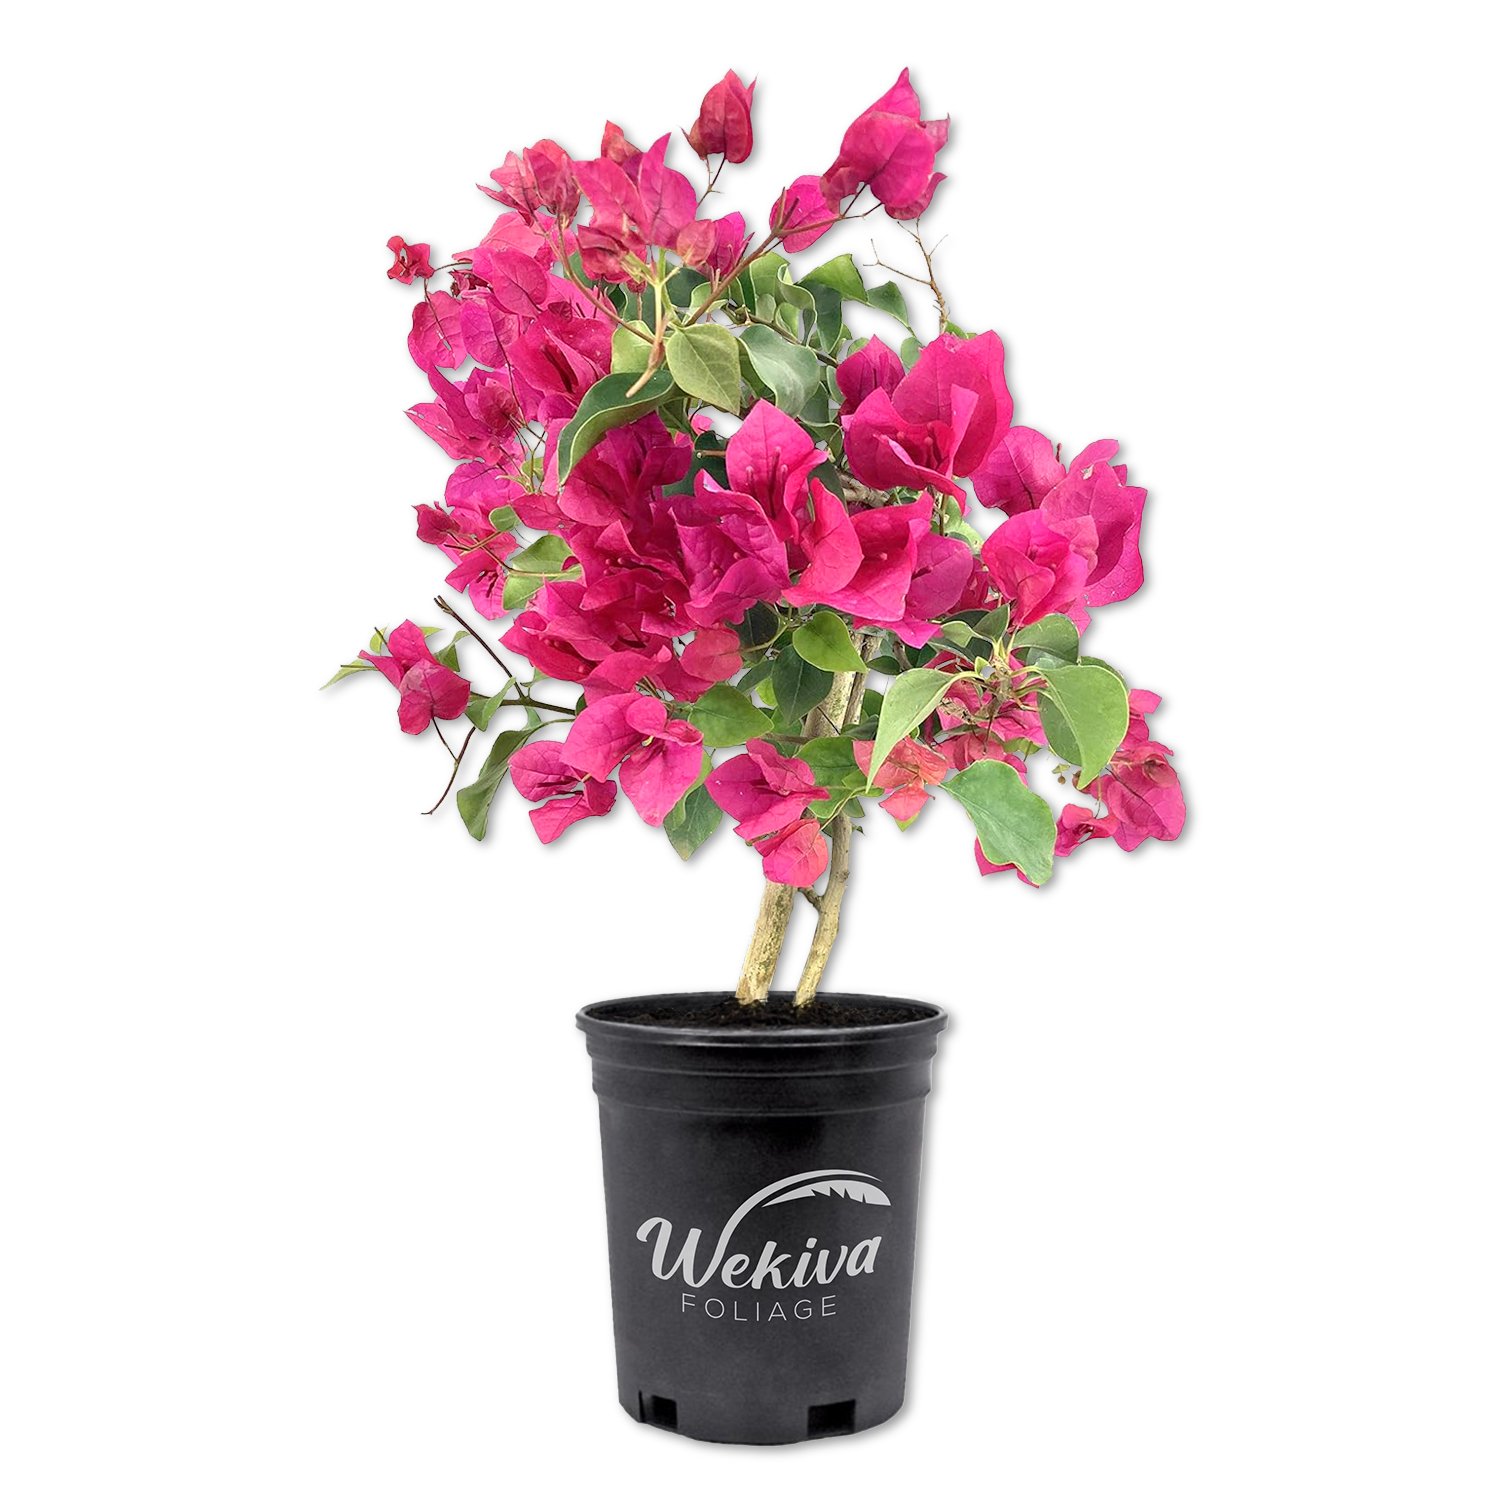 Bougainvillea - Live Plant in a 6 Inch Pot - Colors Chosen Based on Plants in Bloom - Beautiful Flowering Shrub - image 1 of 6